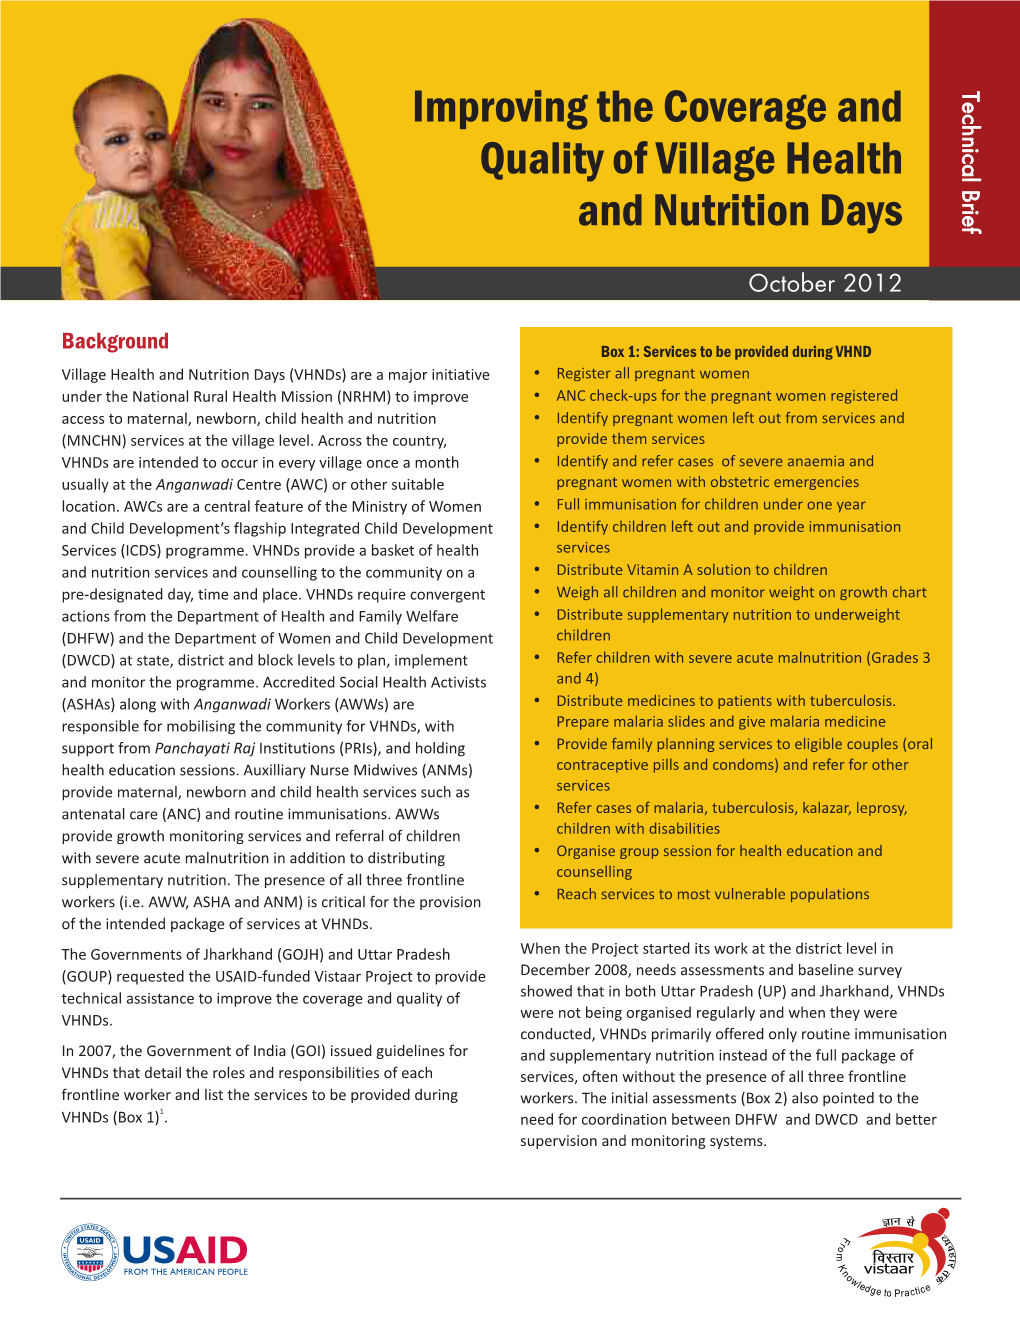 Improving the Coverage and Quality of Village Health and Nutrition Days